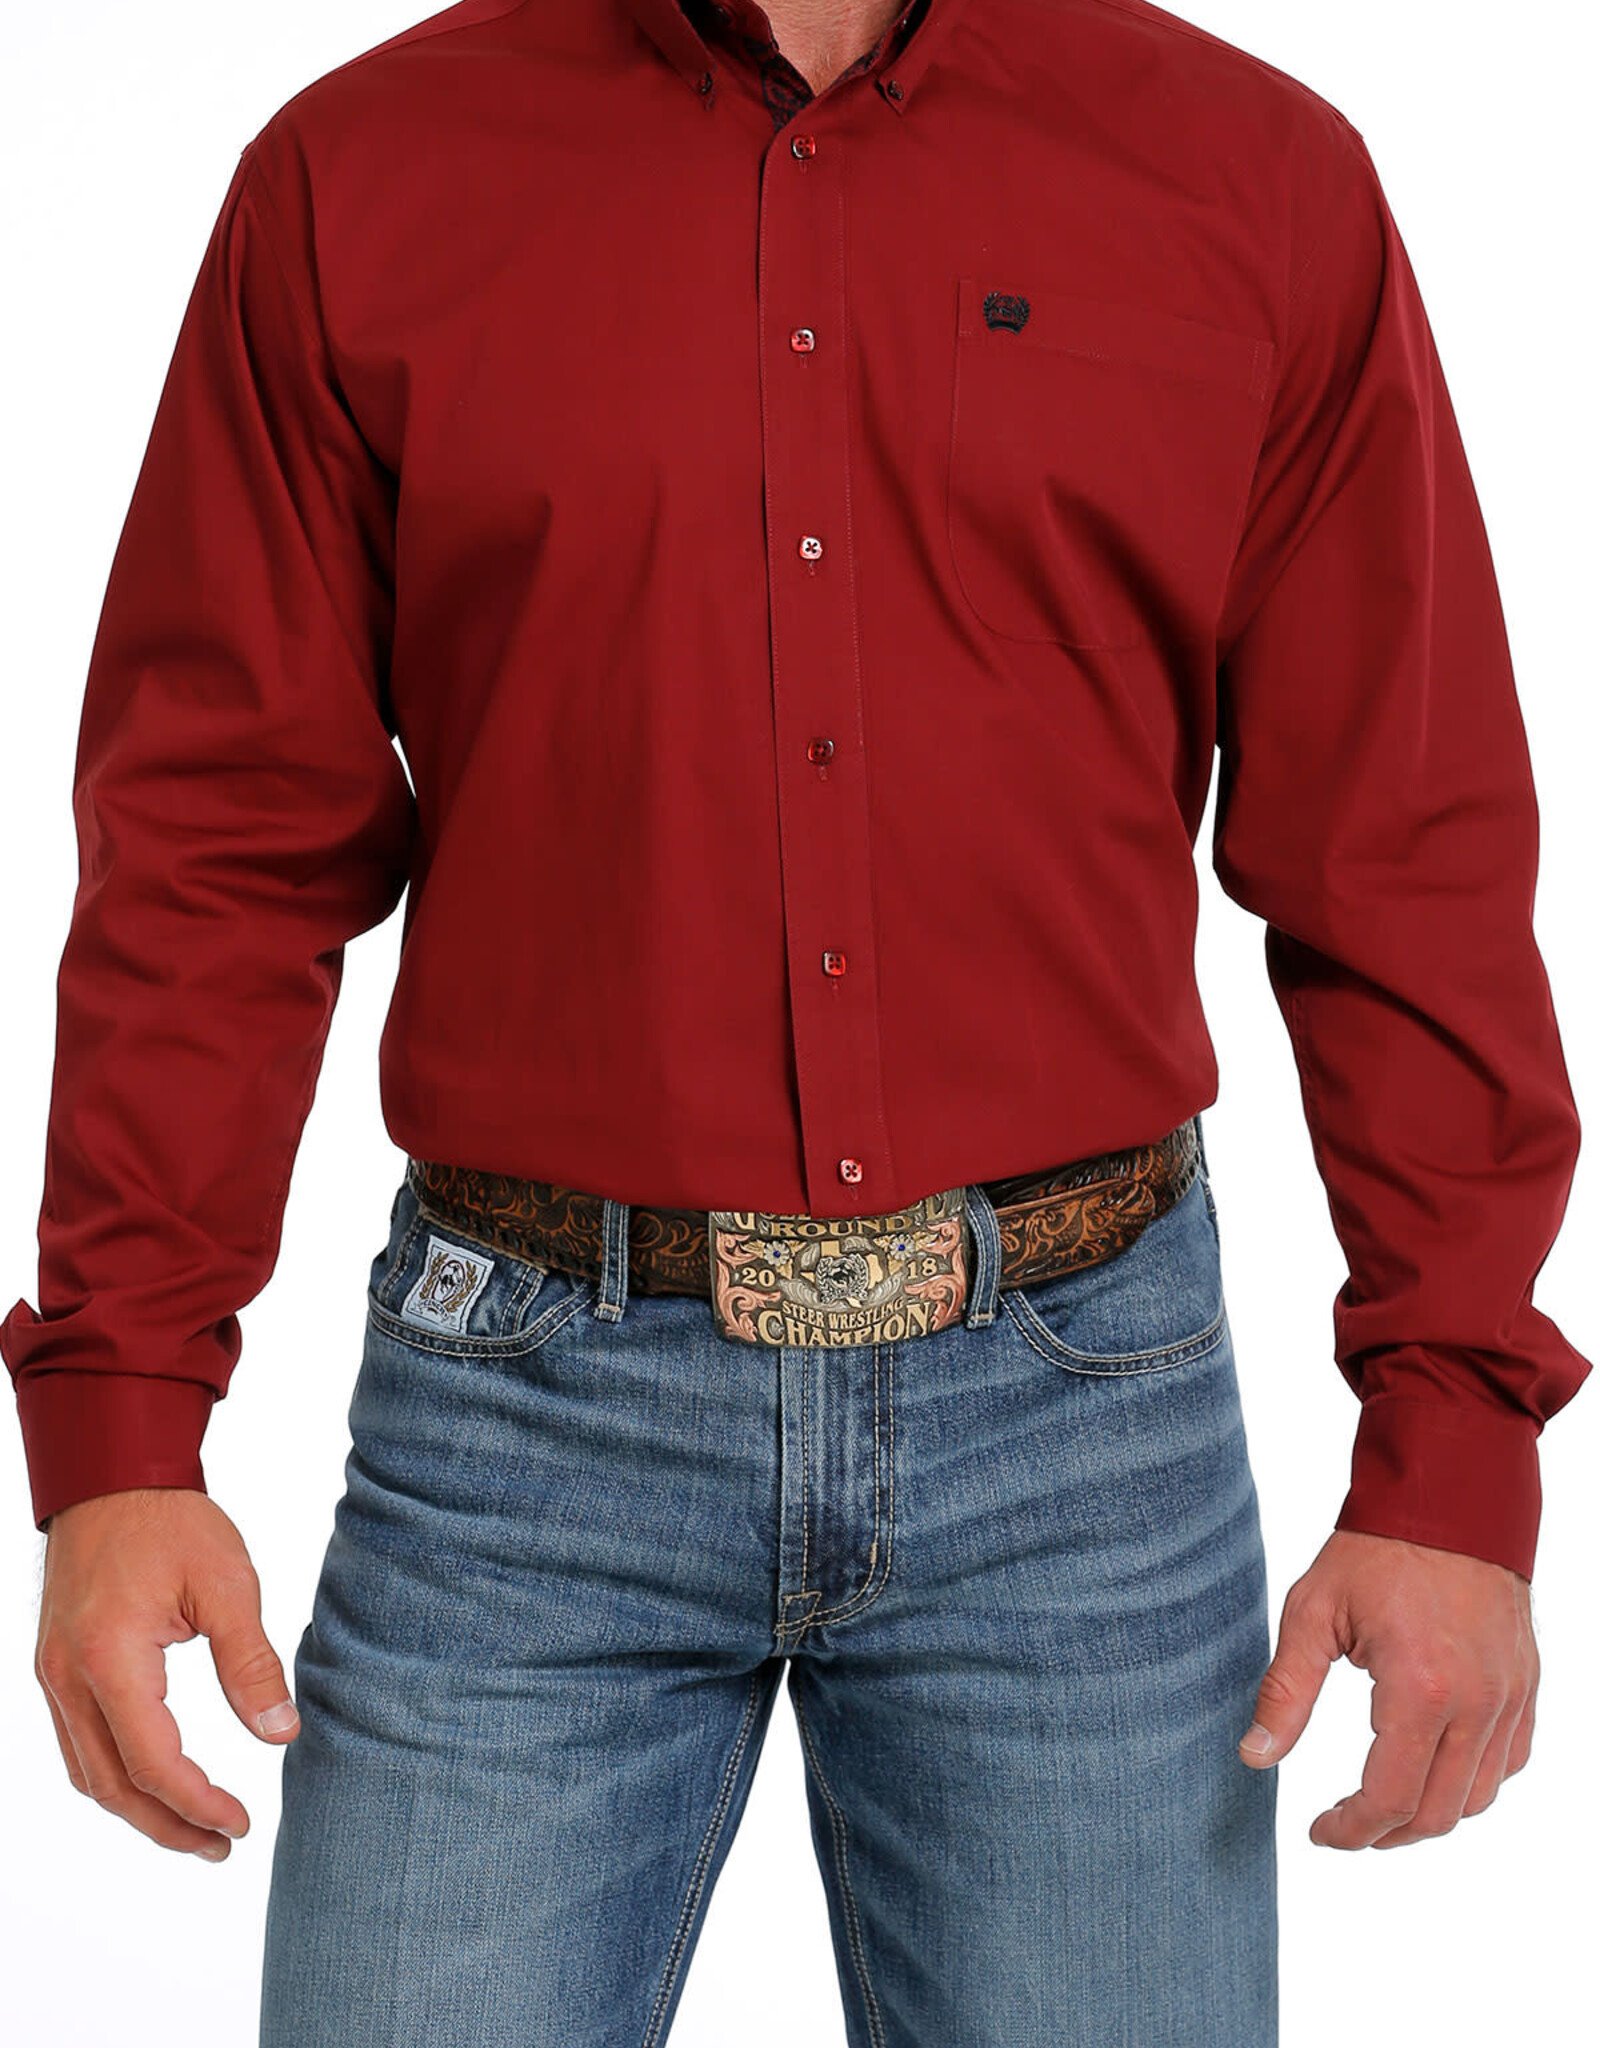 Cinch Mens Cinch Long Sleeve Solid Burgundy Red Western Button Arena Shirt